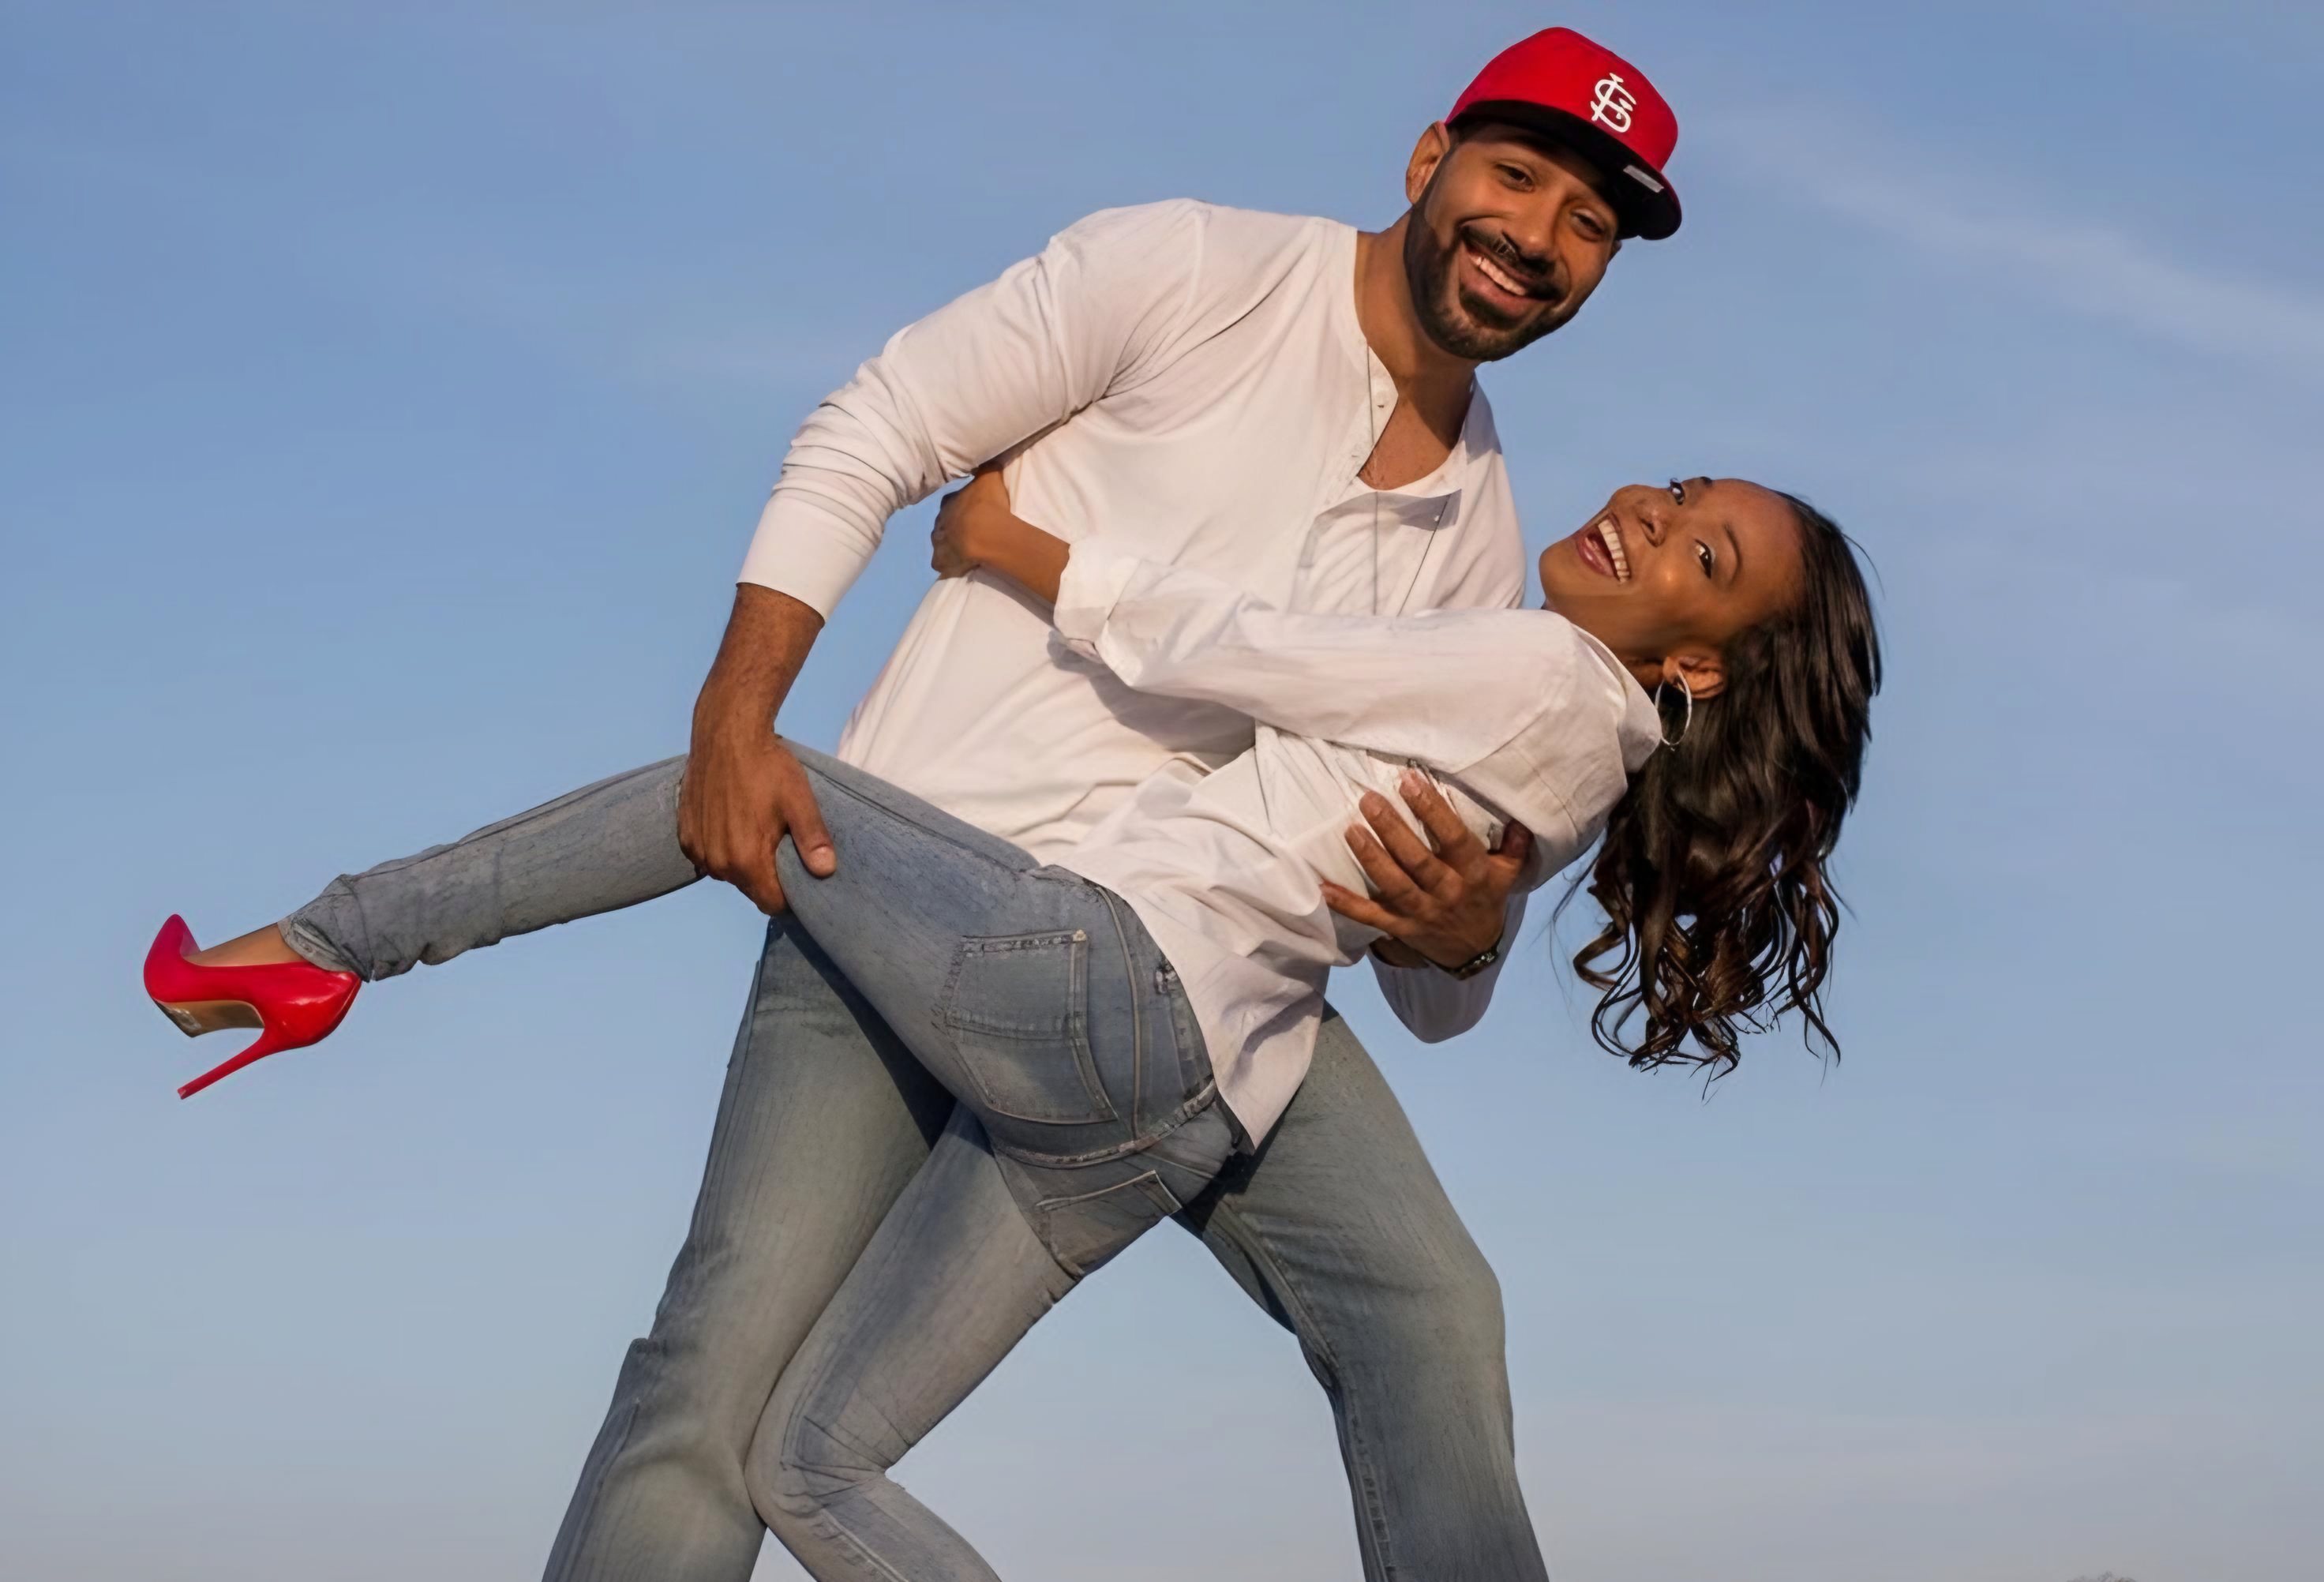 7 Romantic Activities You Should Do With Your Partner To Spice Up Your Relationship